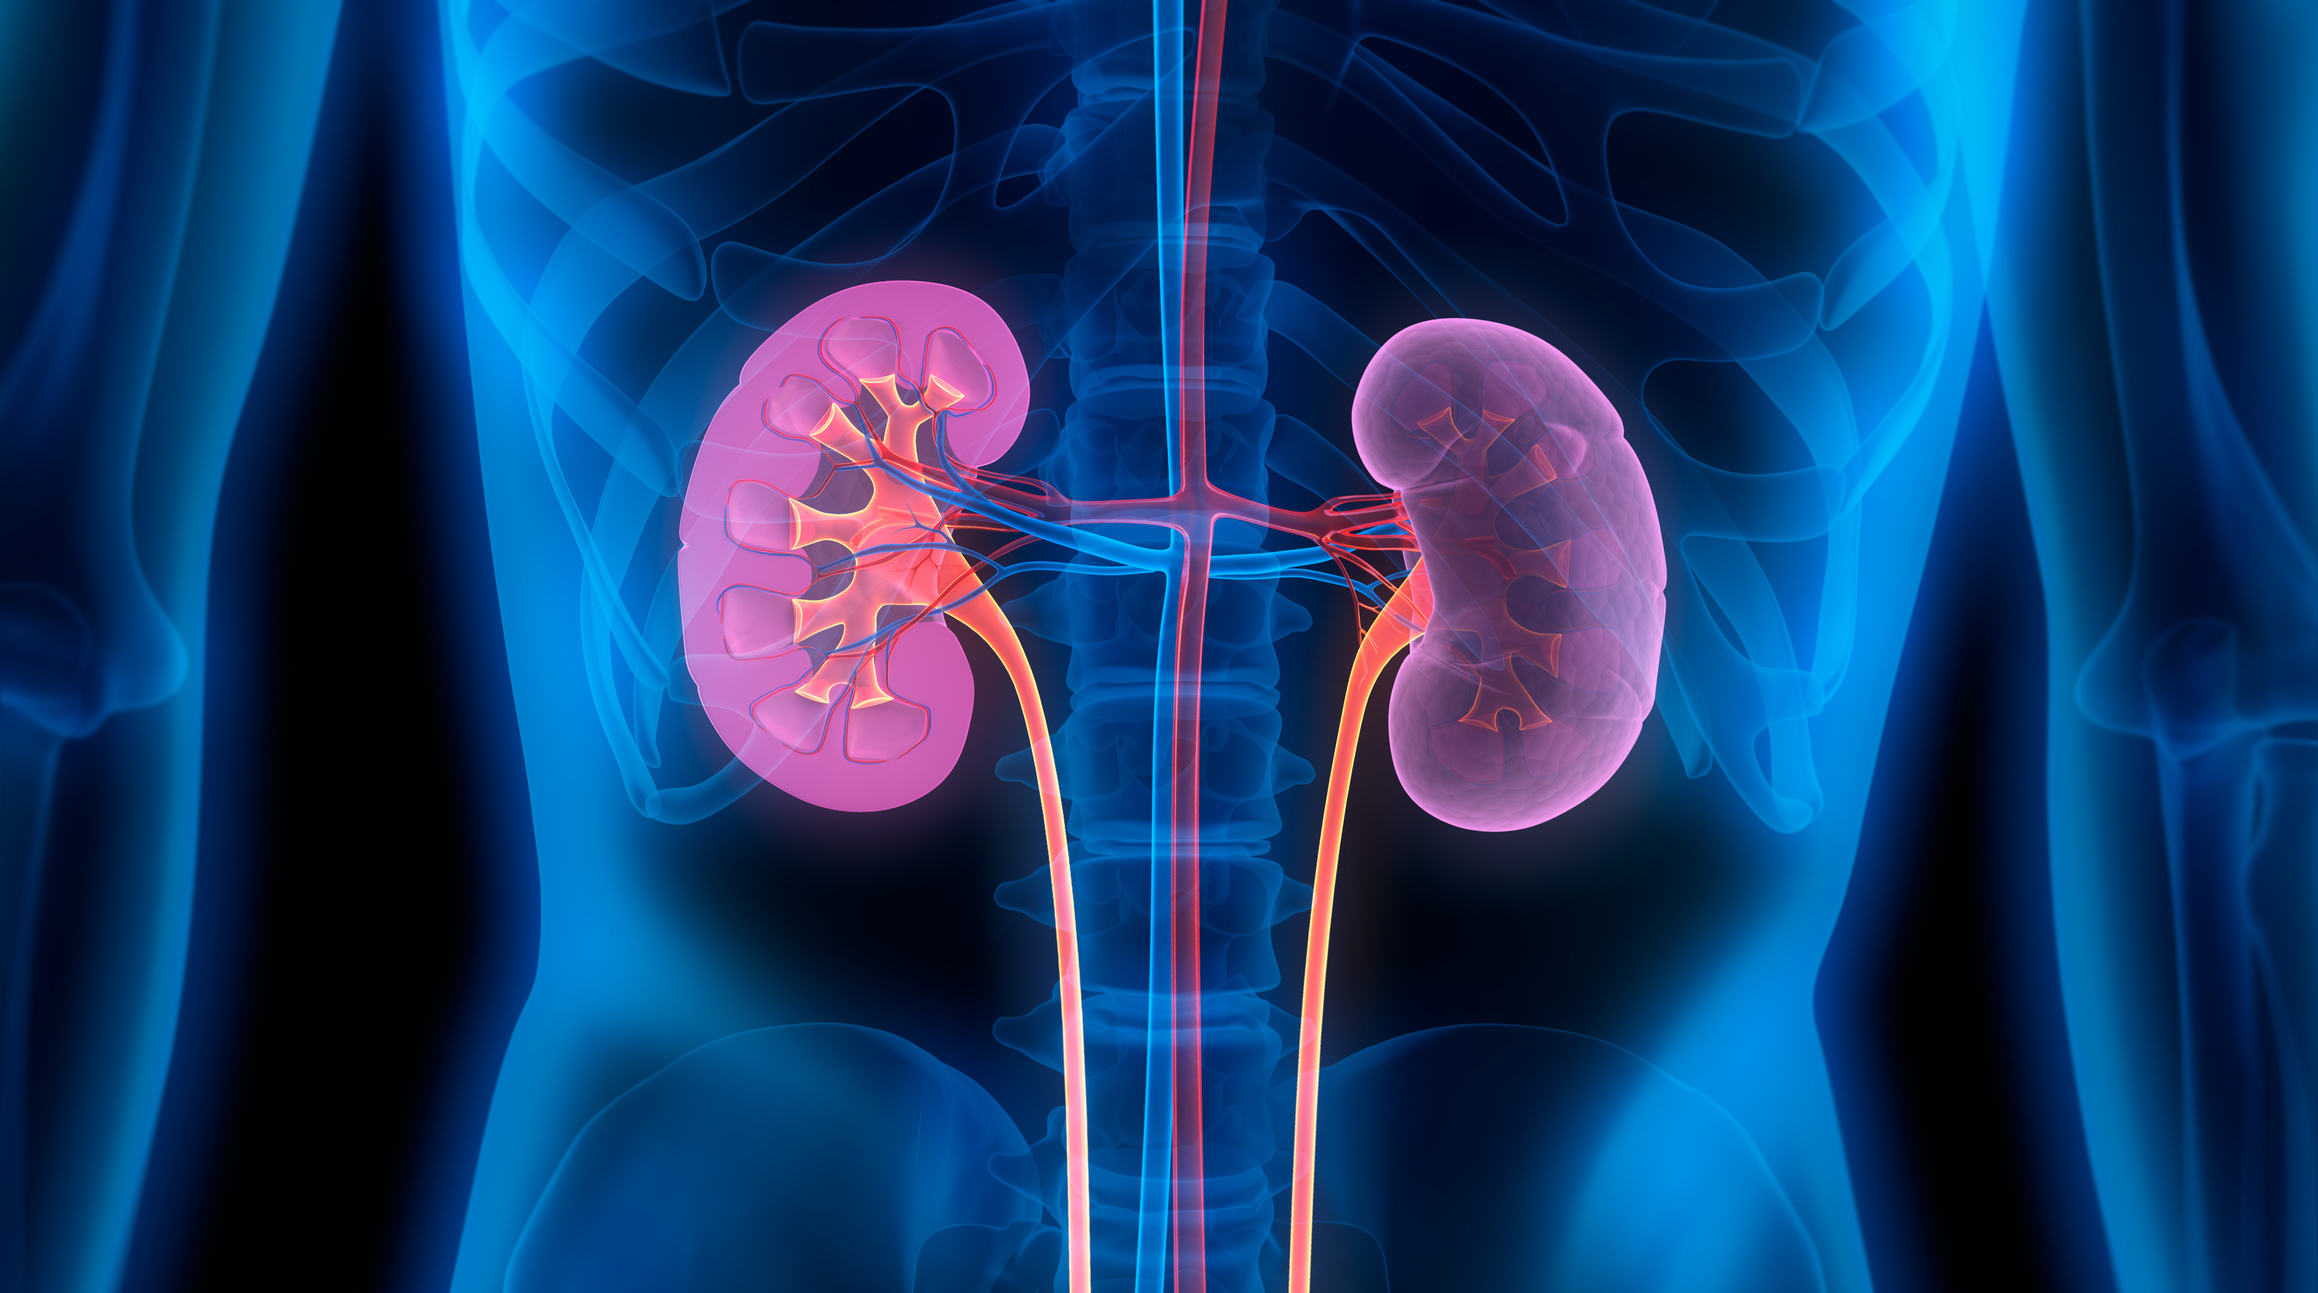 Comparing Open Partial Nephrectomy and Laparoscopic for Renal Cell Carcinoma Treatment